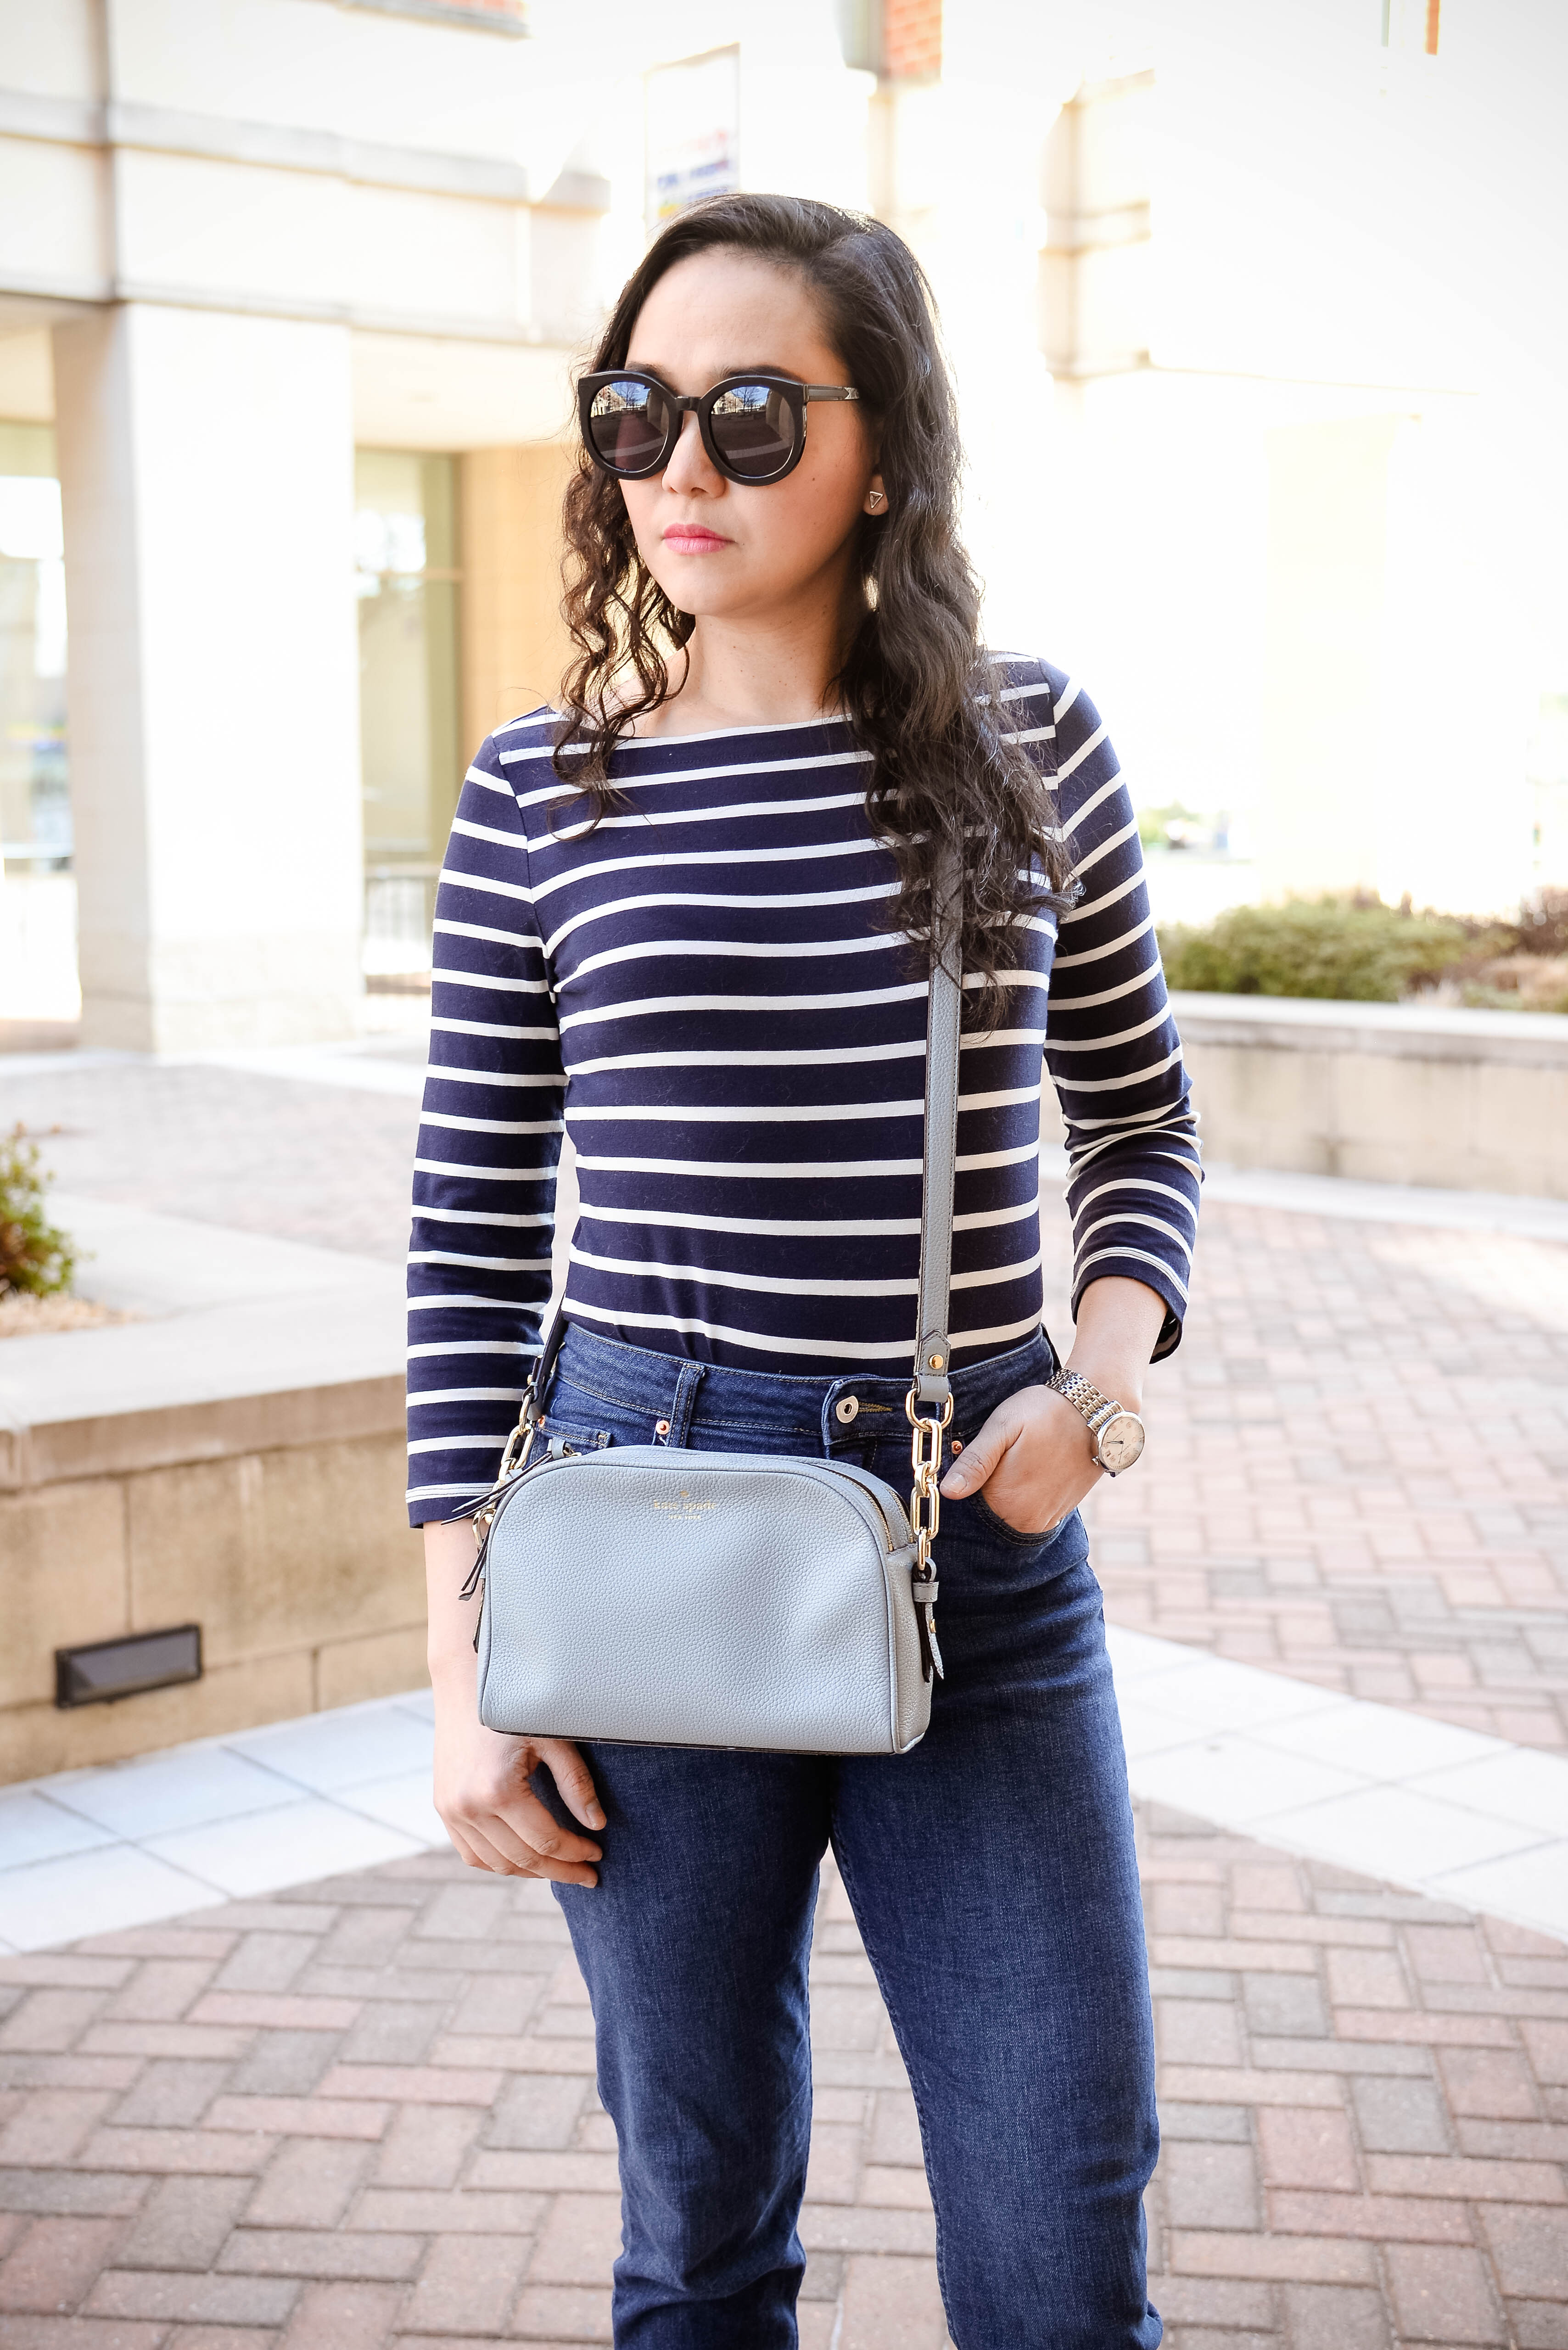 Daily look: Monday Casuals in Classic Stripes - SimplyChristianne